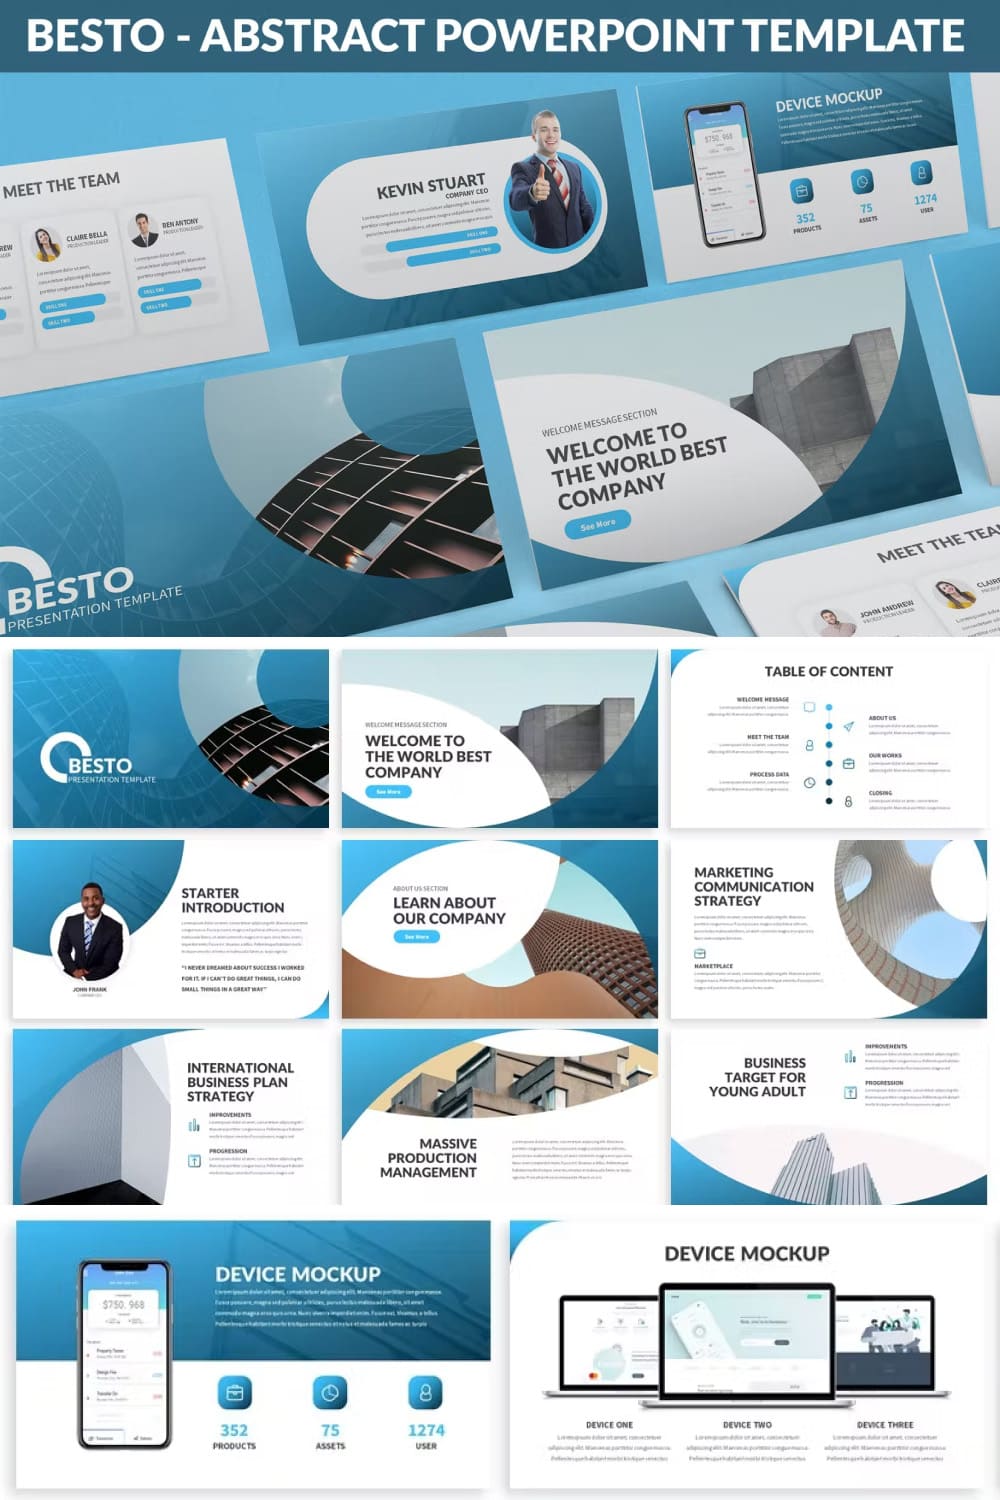 Besto abstract powerpoint template - pinterest image preview.